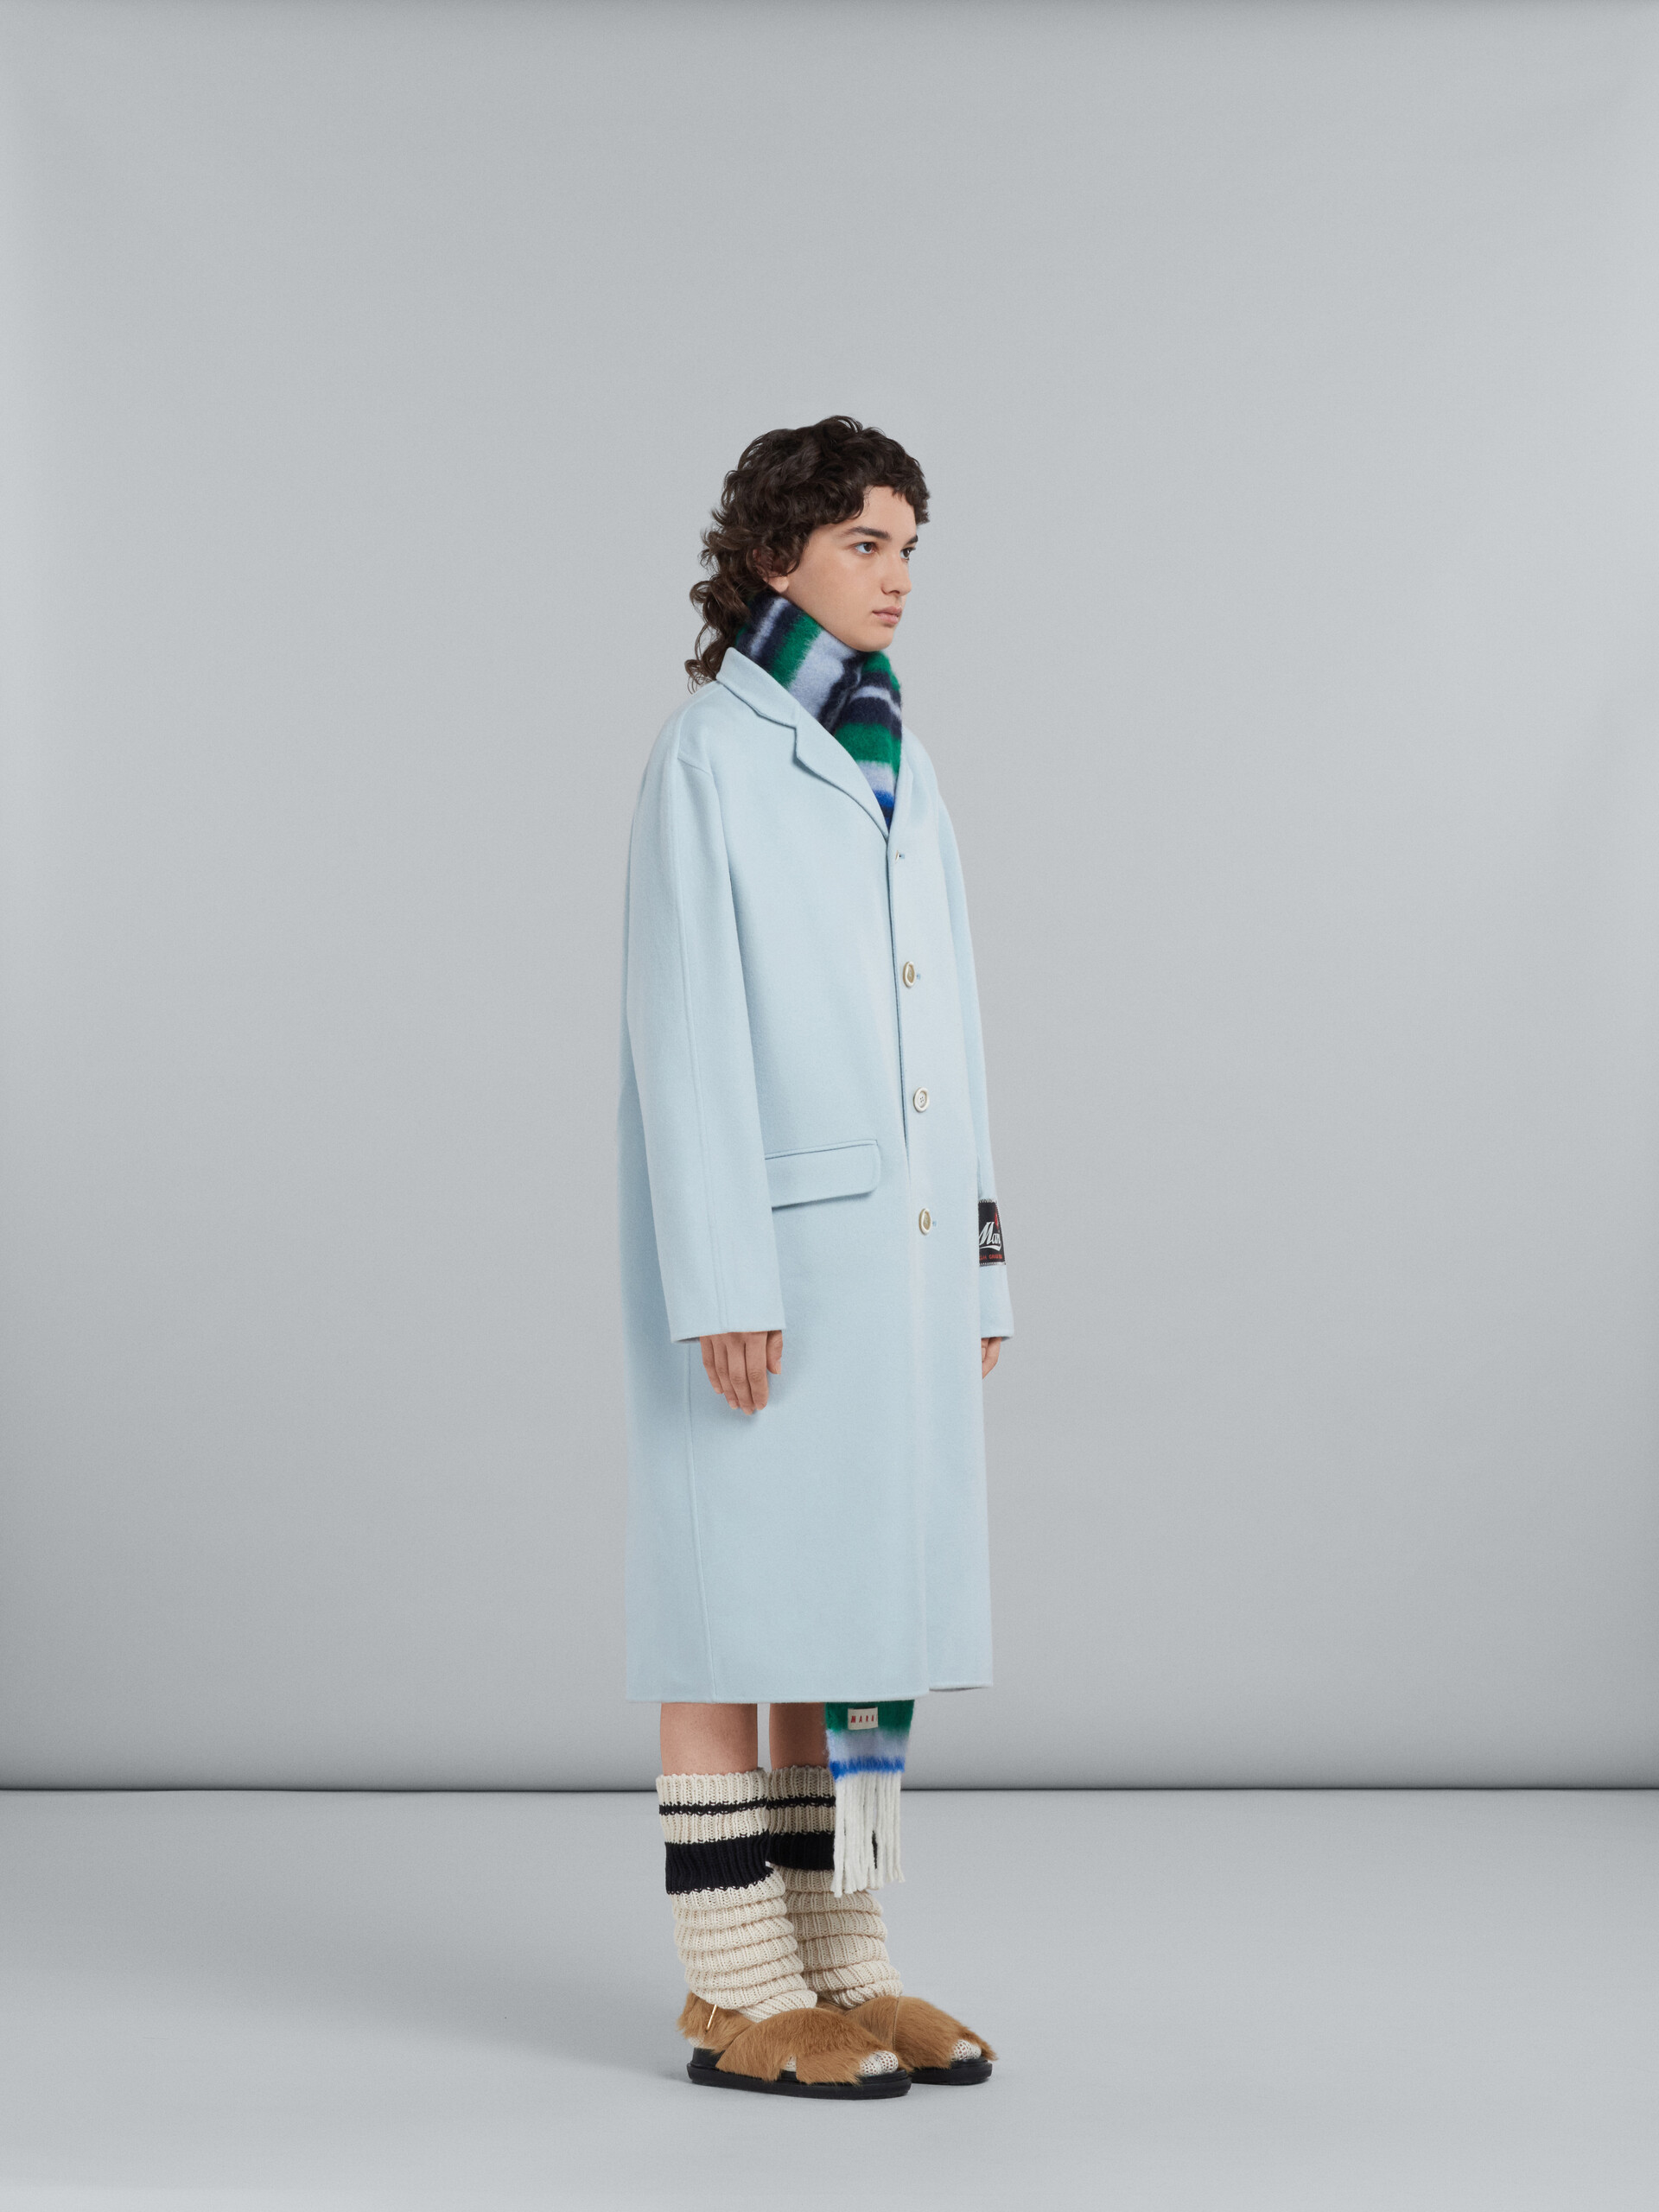 Light blue coat in wool and cashmere - Coat - Image 6